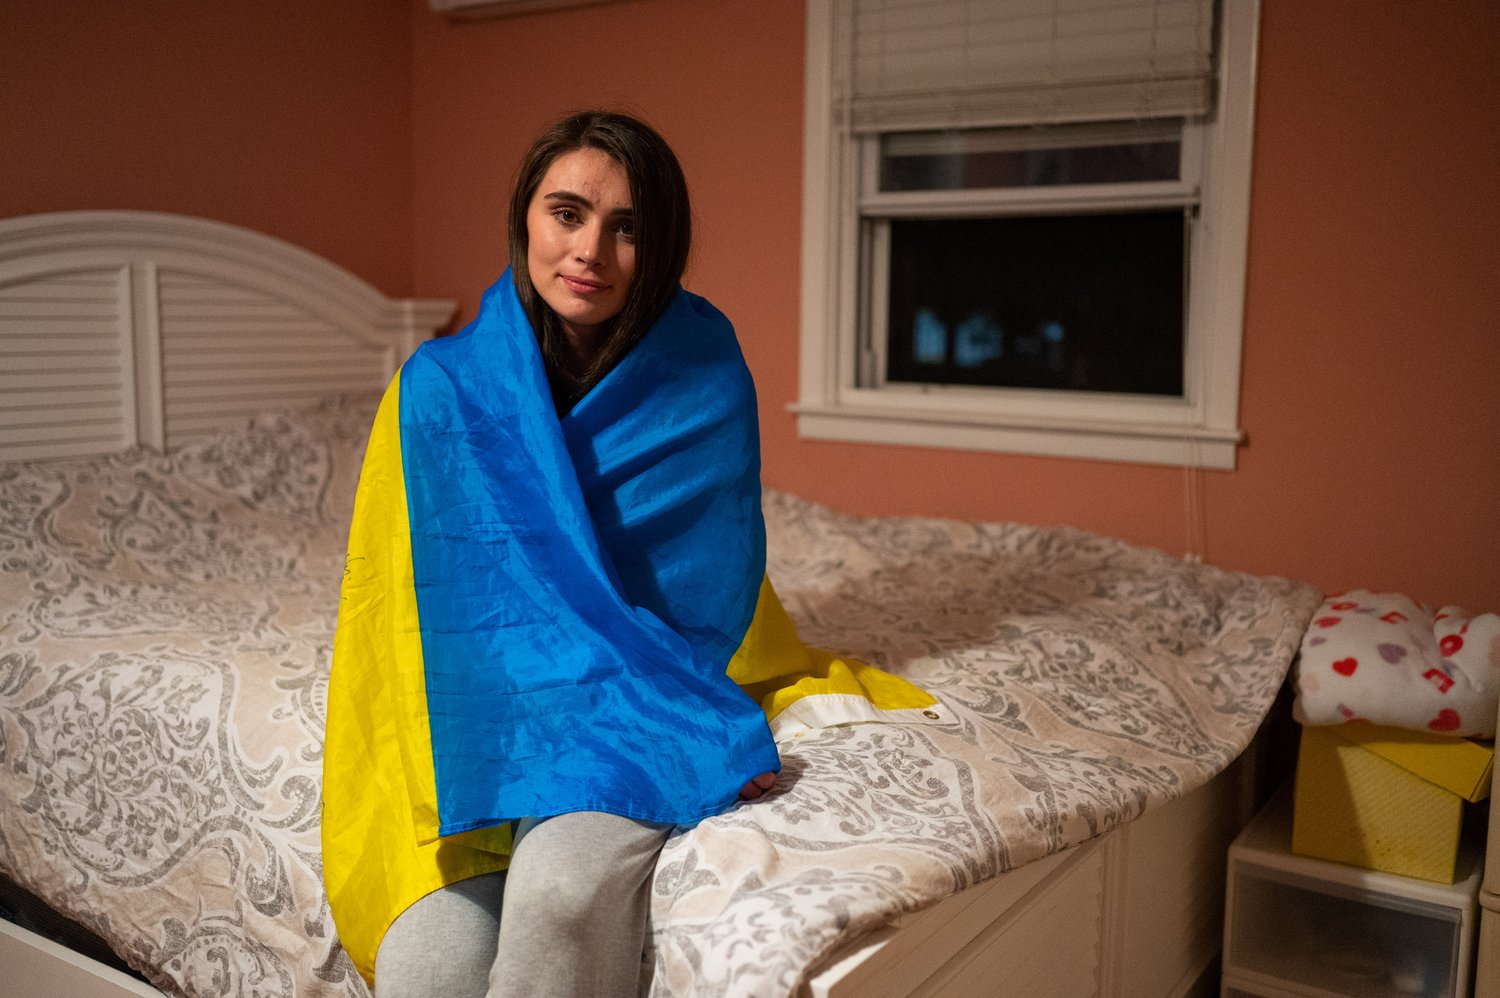   Yuliia Bihun drapes herself with the Ukrainian flag while sitting on her bed.  